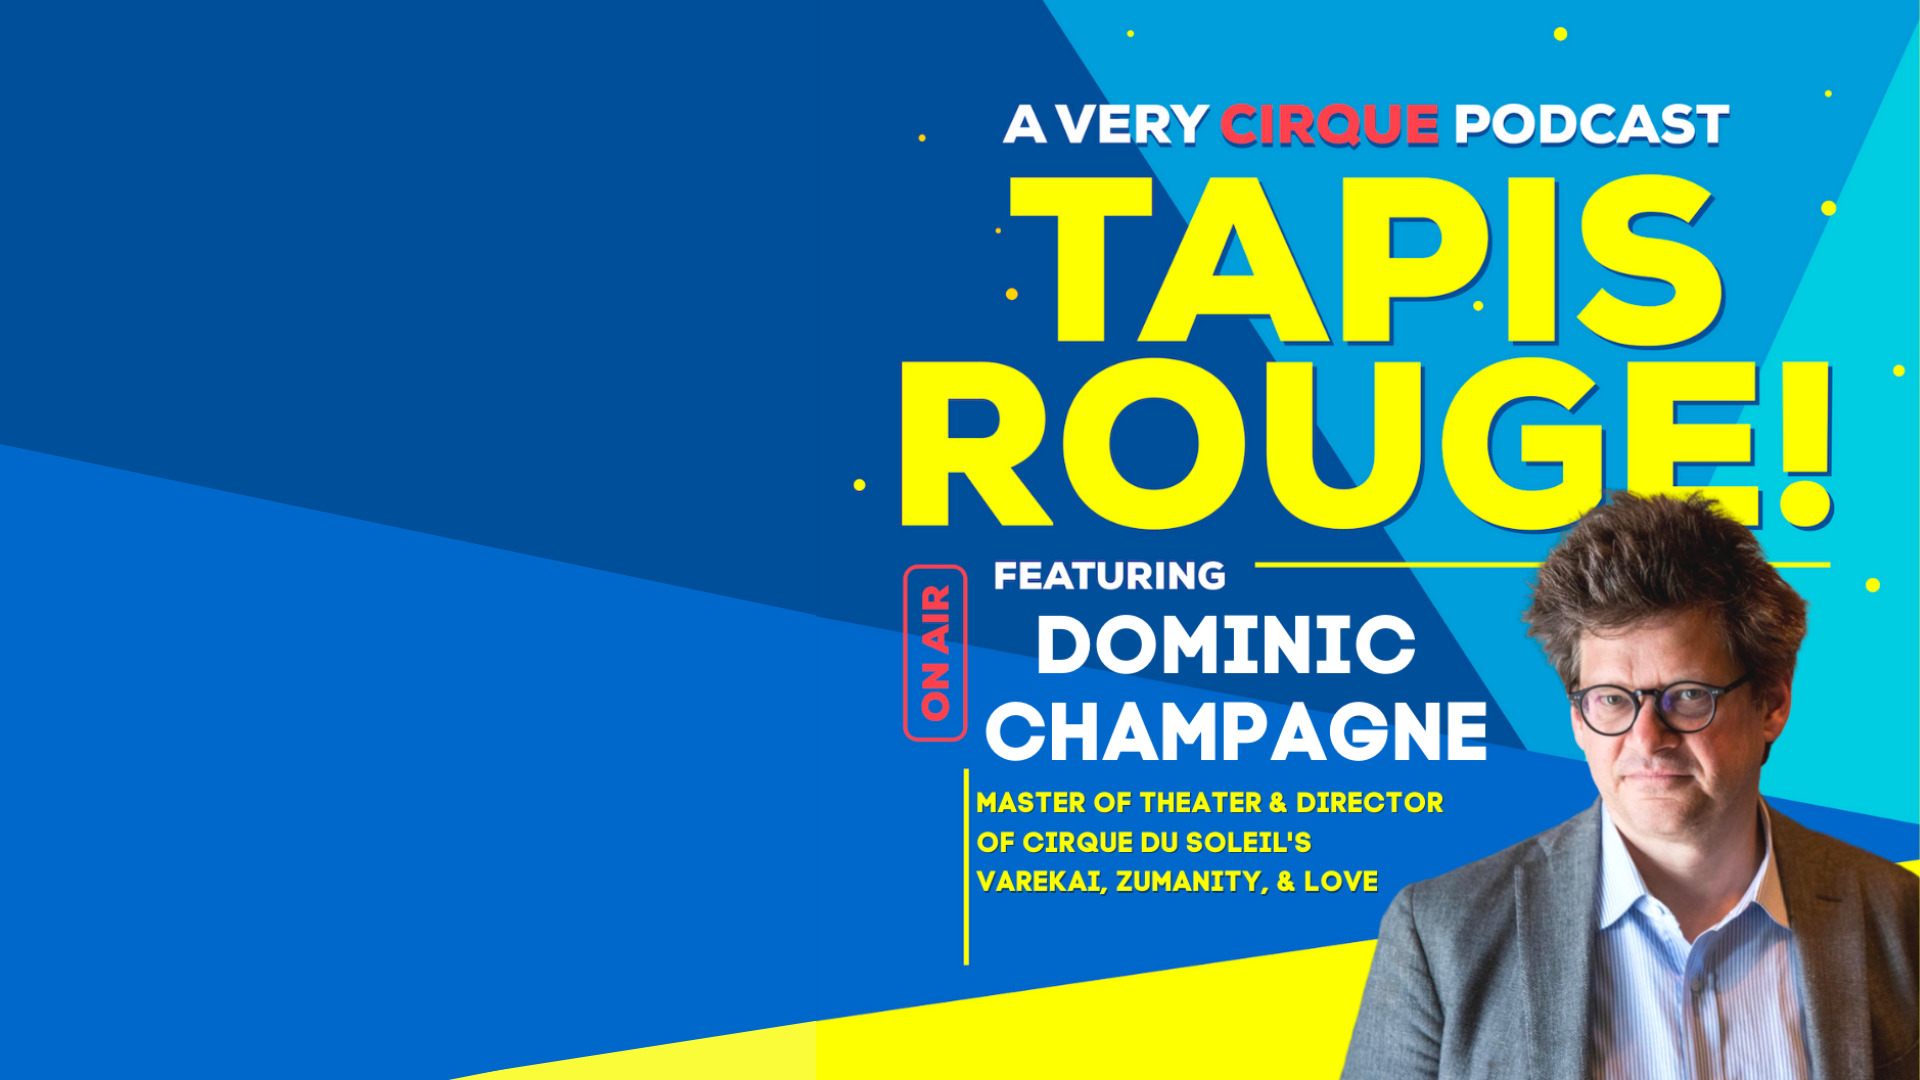 Tapis Rouge! Podcast: DOMINIC CHAMPAGNE! Master of Theater & Director of Cirque du Soleil’s Varekai, Zumanity, & Love